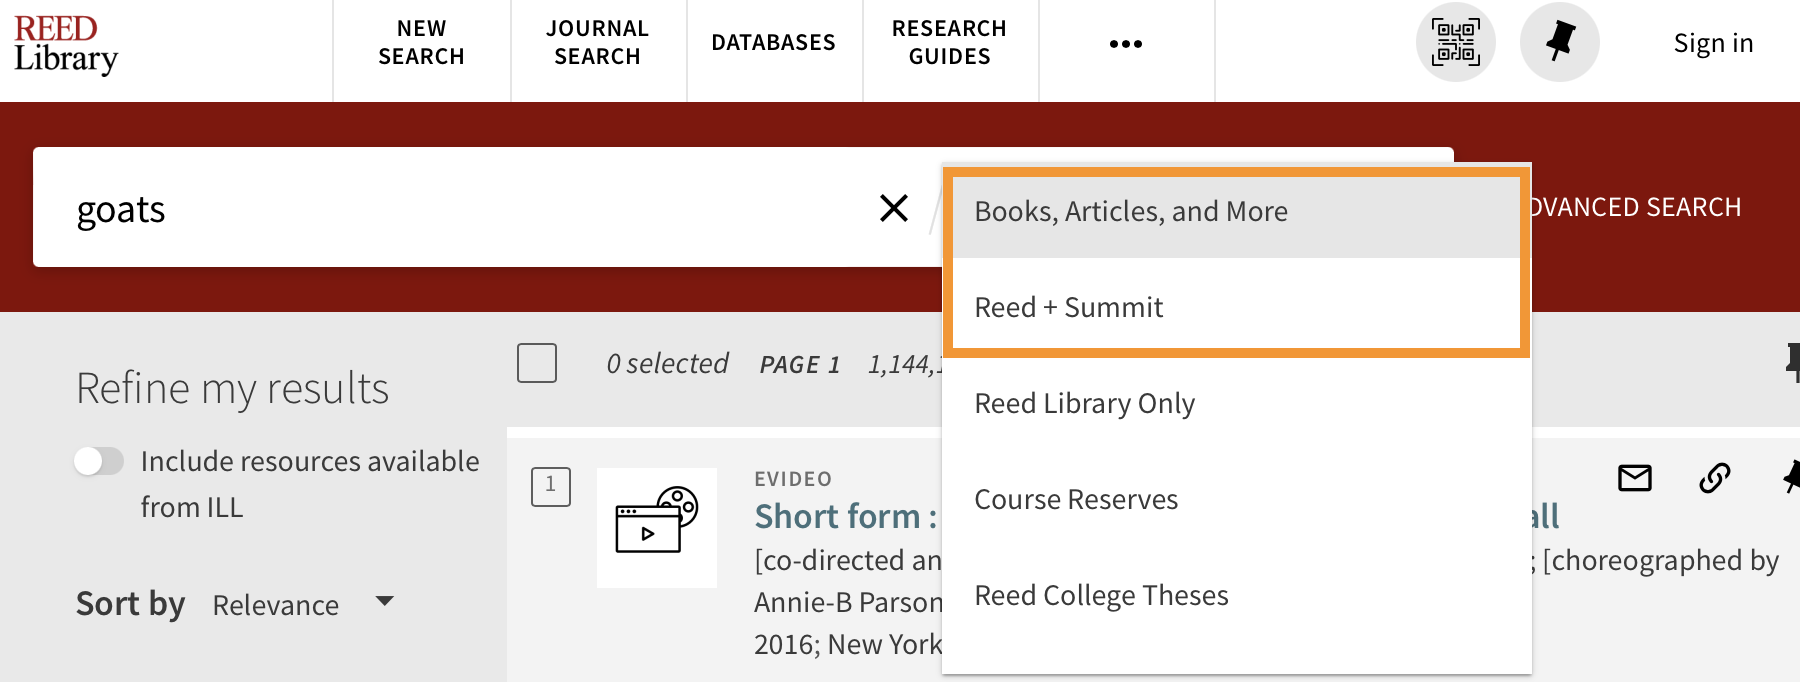 screenshot of Reed catalog search with "Reed + Summit" and "Reed + Summit + Articles" dropdown circled.